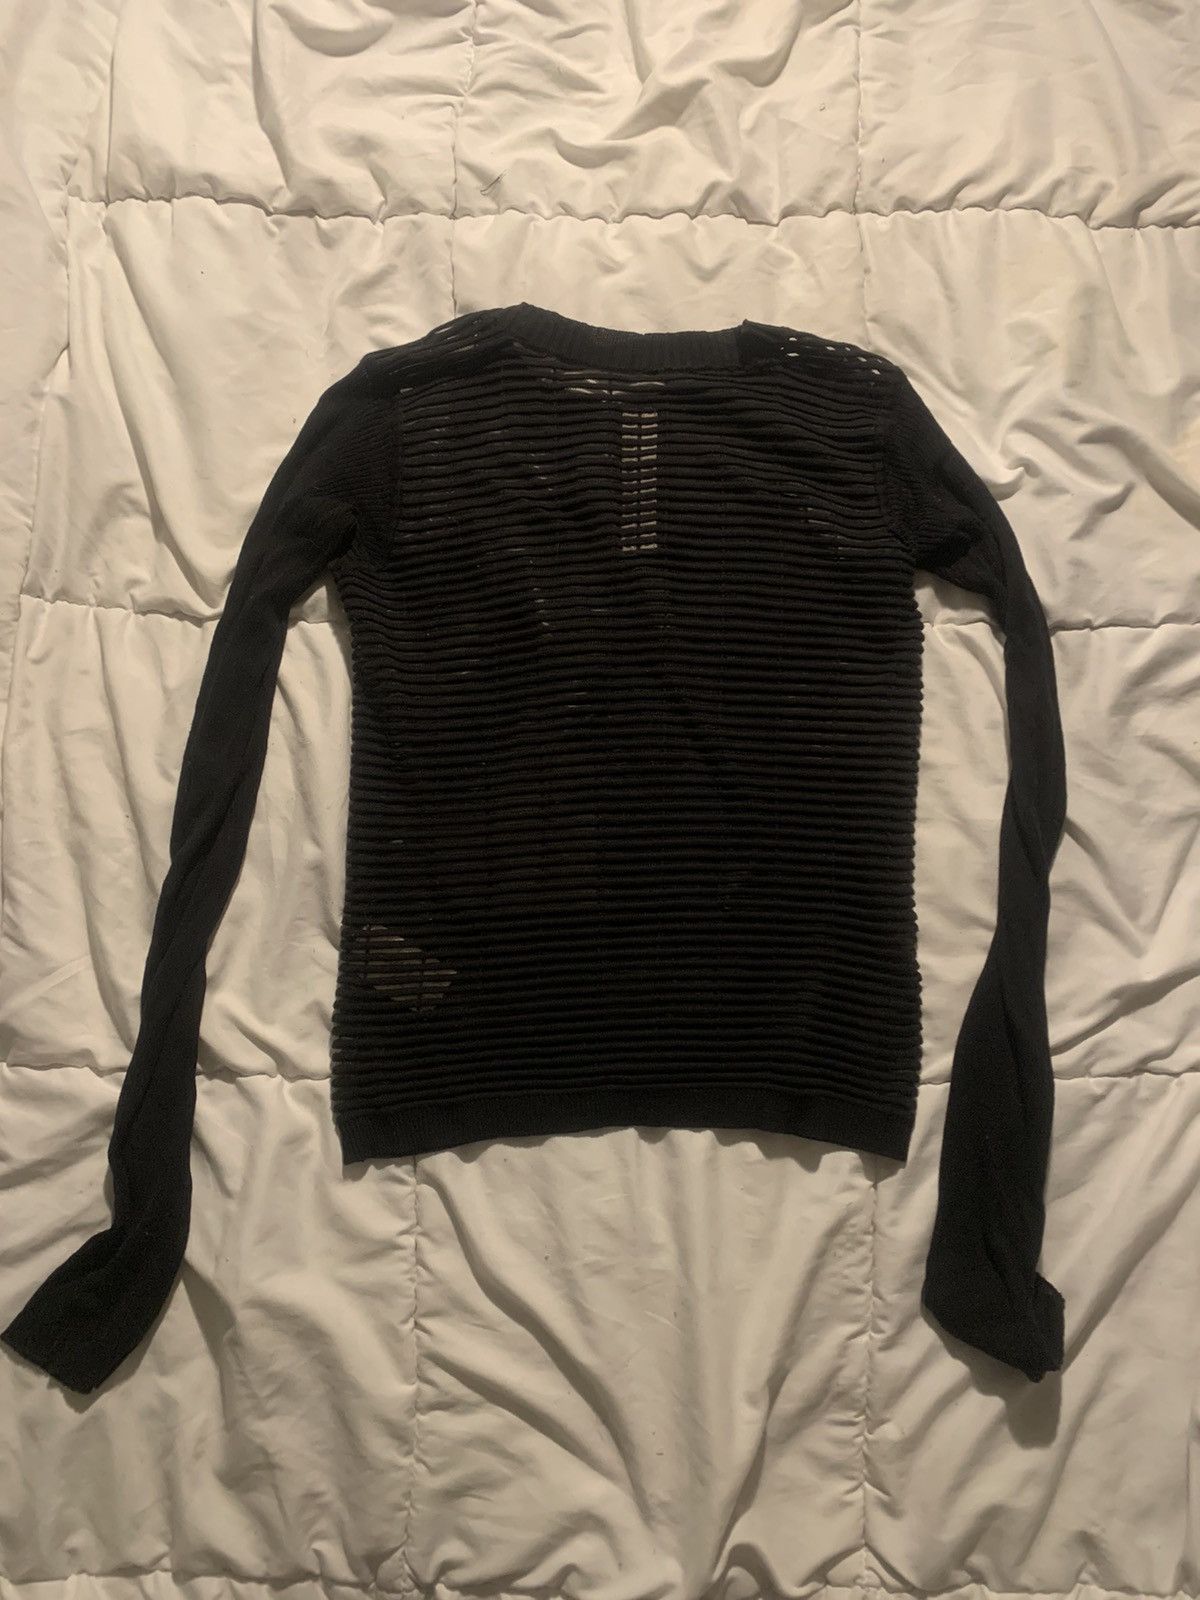 Rick Owens S/S15 Ribbed Knit Sweater Size US XS / EU 42 / 0 - 2 Preview